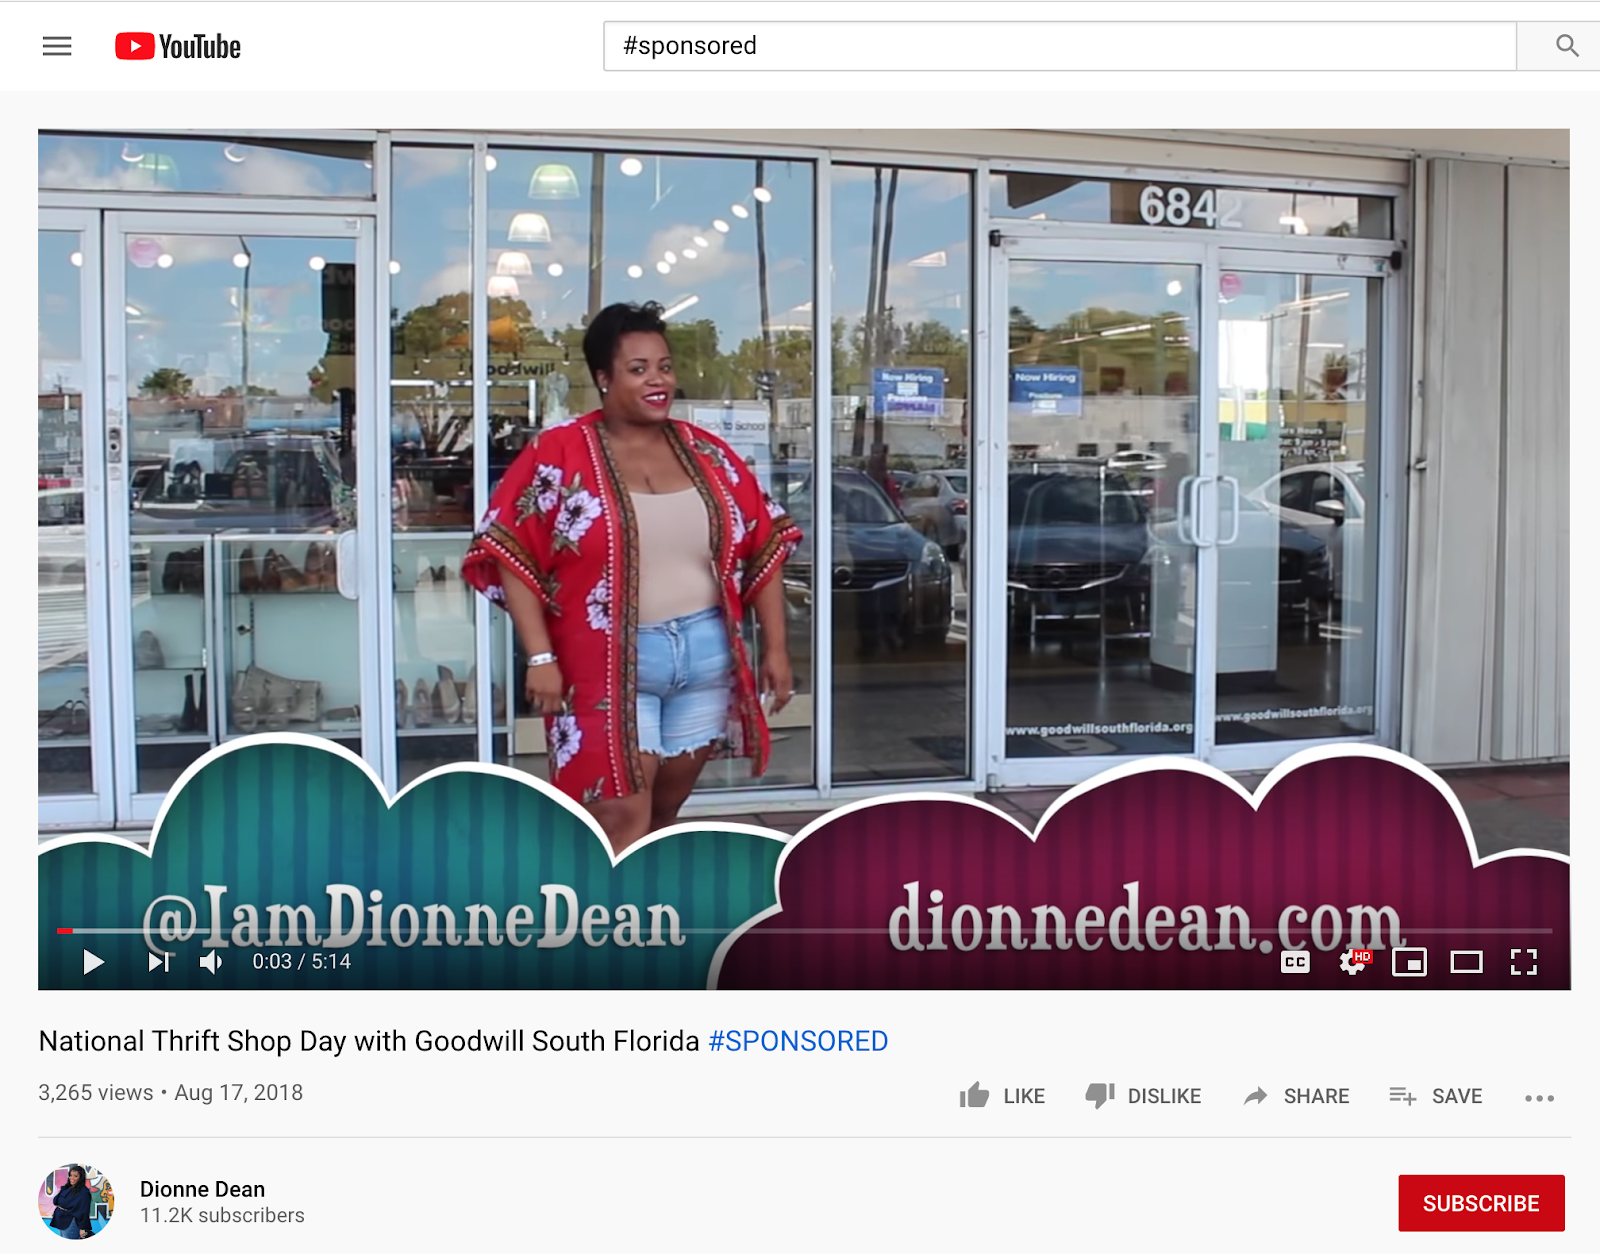 example of a sponsored video collaboration